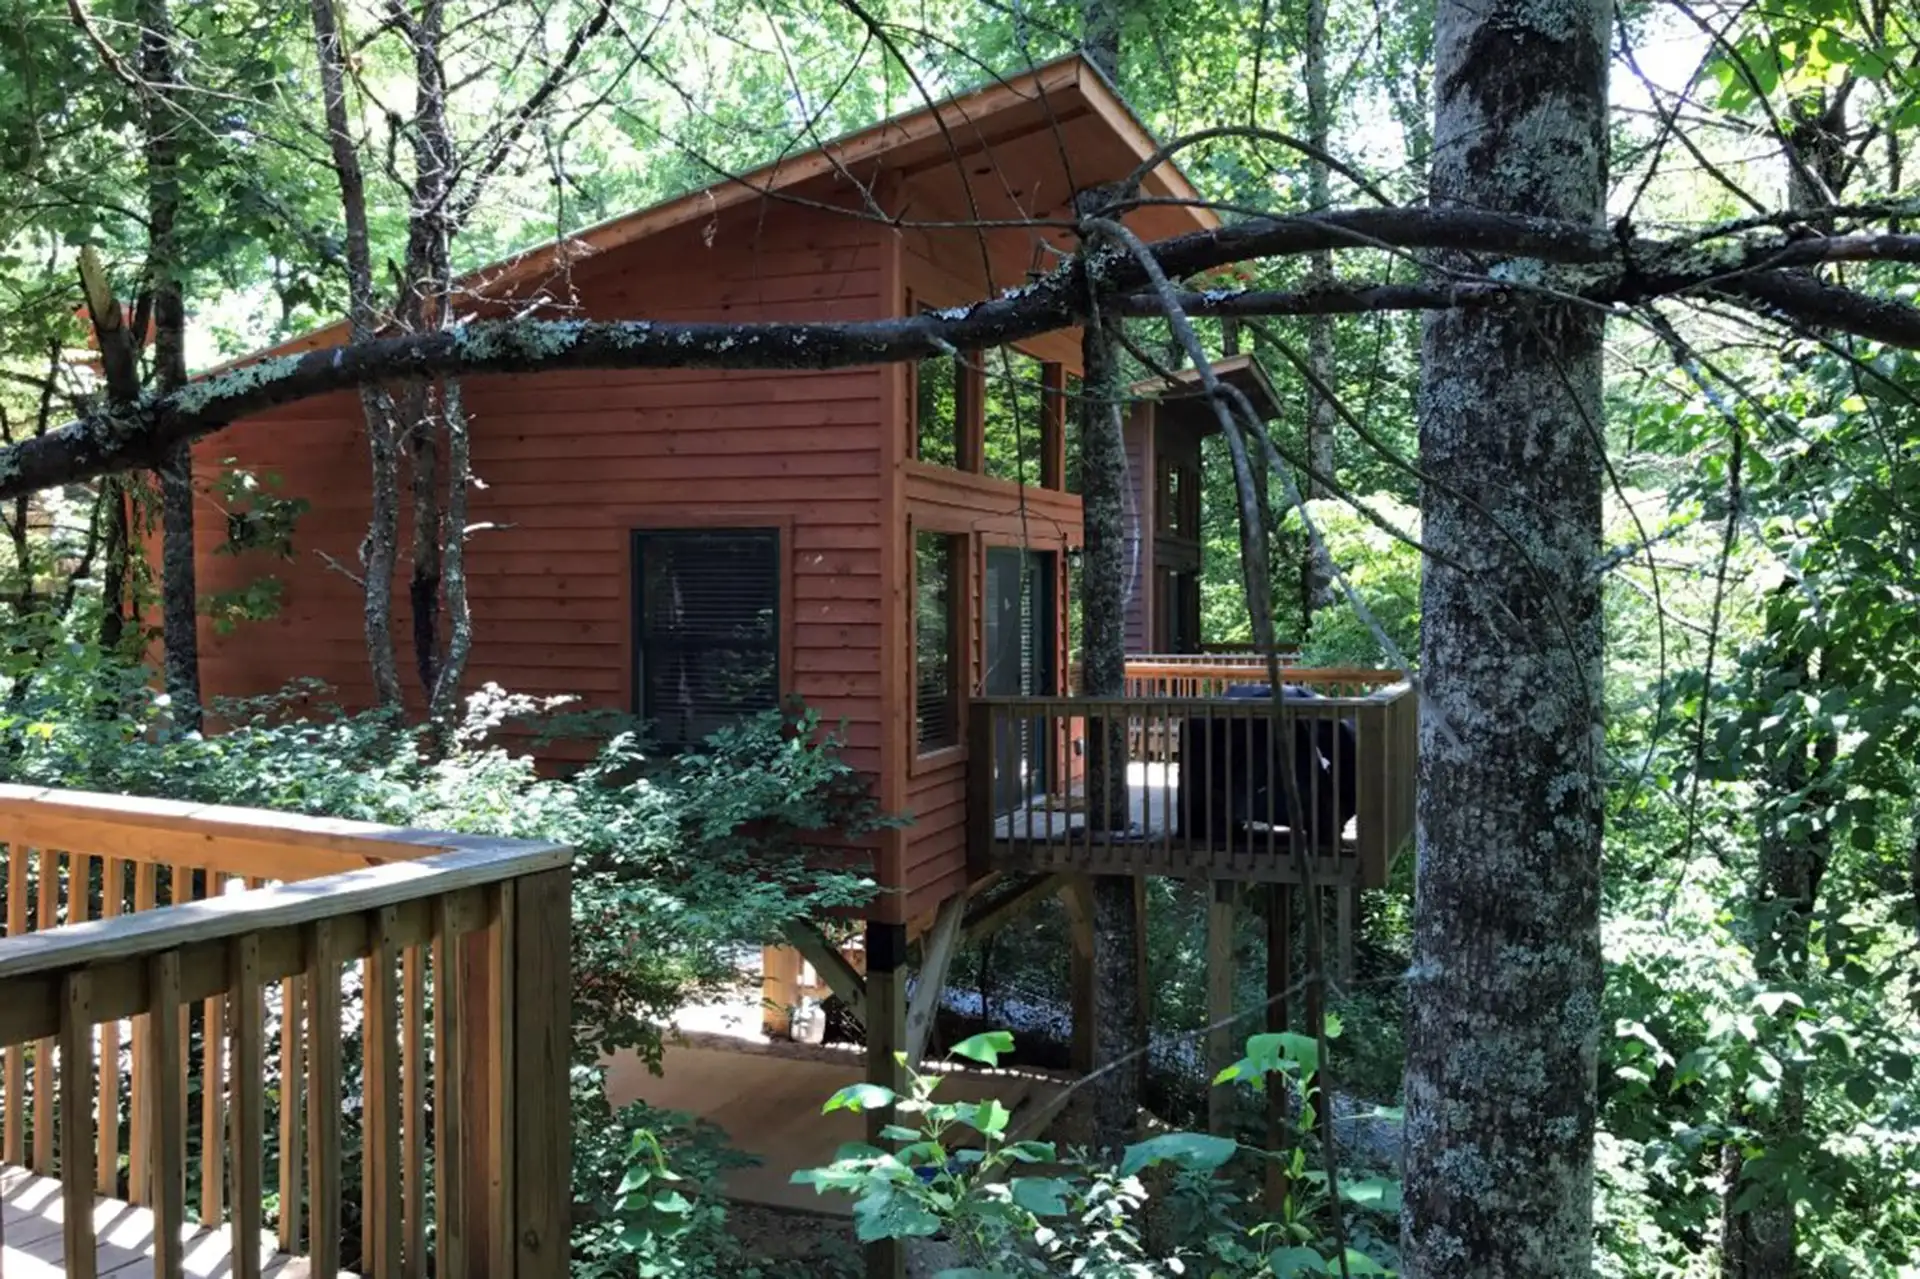 River's Edge Treehouse Resort in North Carolina; Courtesy of River's Edge Treehouse Resort